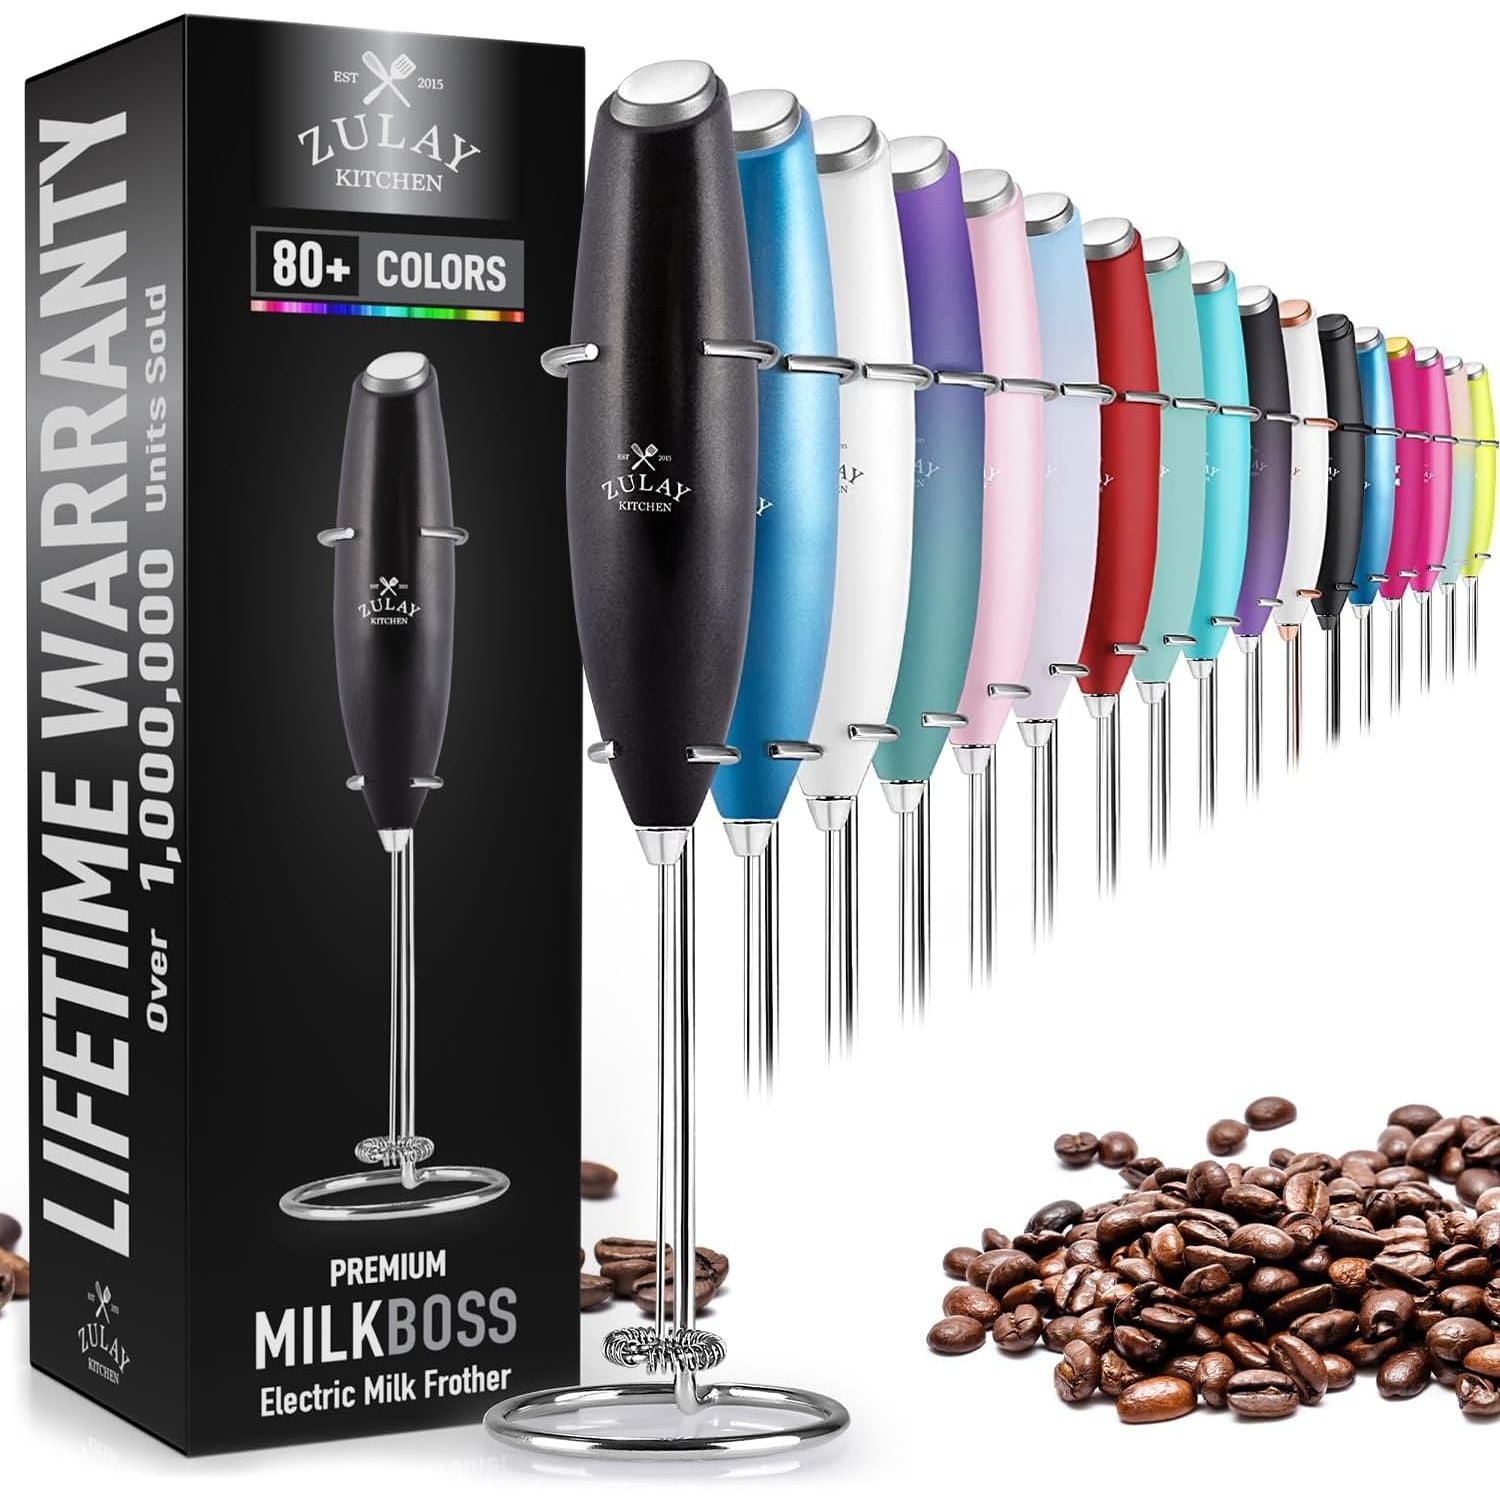 Premium Milk Boss Milk Frother OG with Stand